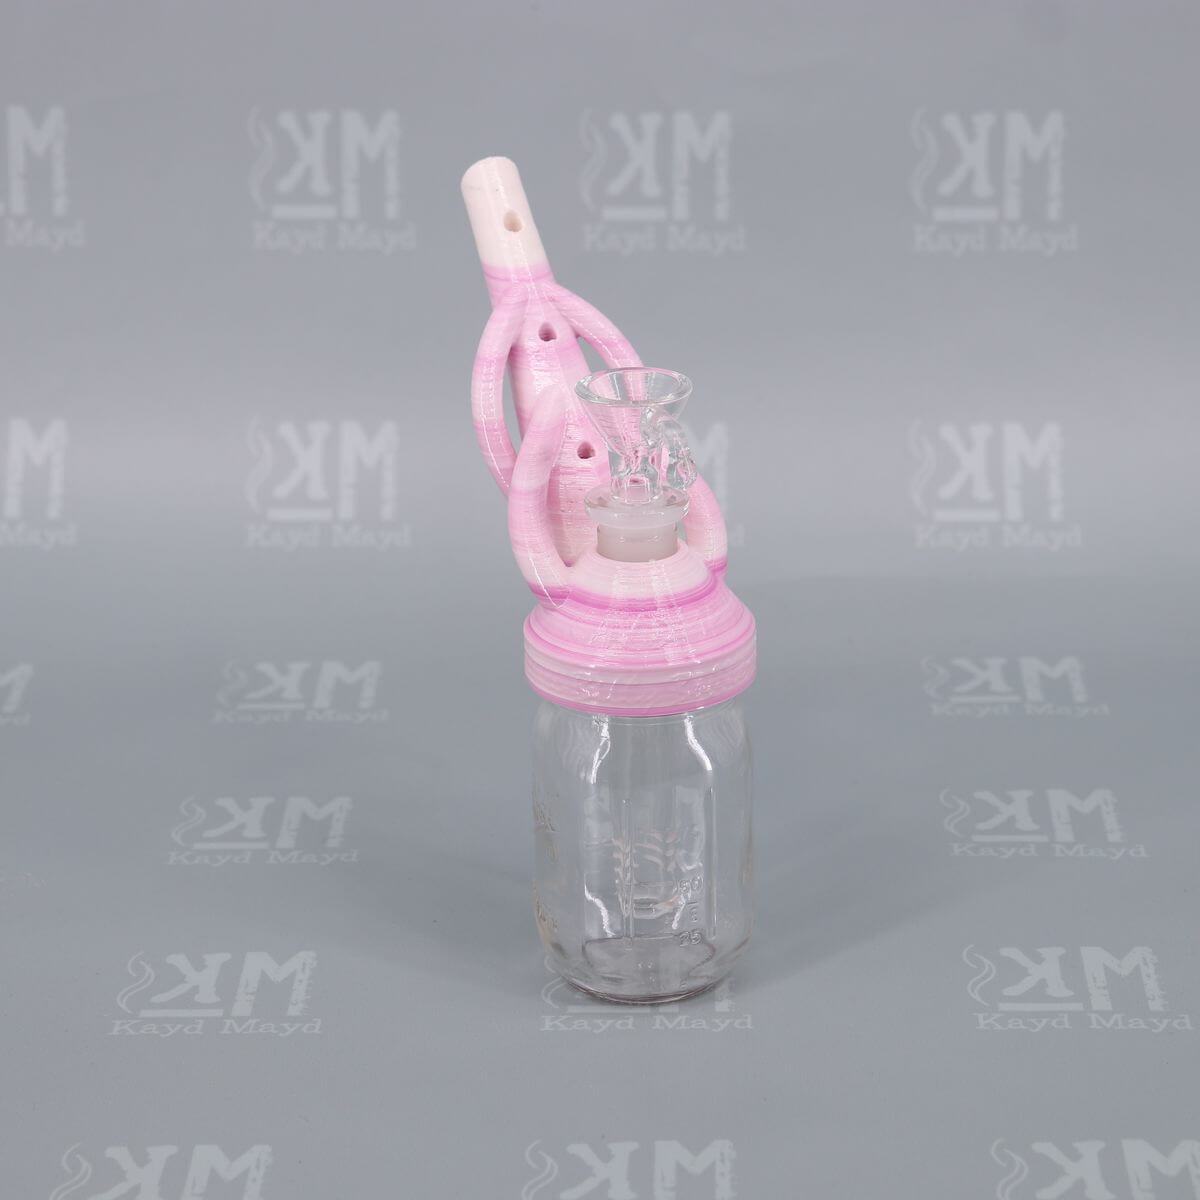 Creme de Pink color of Wee Billy Bubbler No. 2 - Amazing 3D Printed Water Pipe by Kayd Mayd